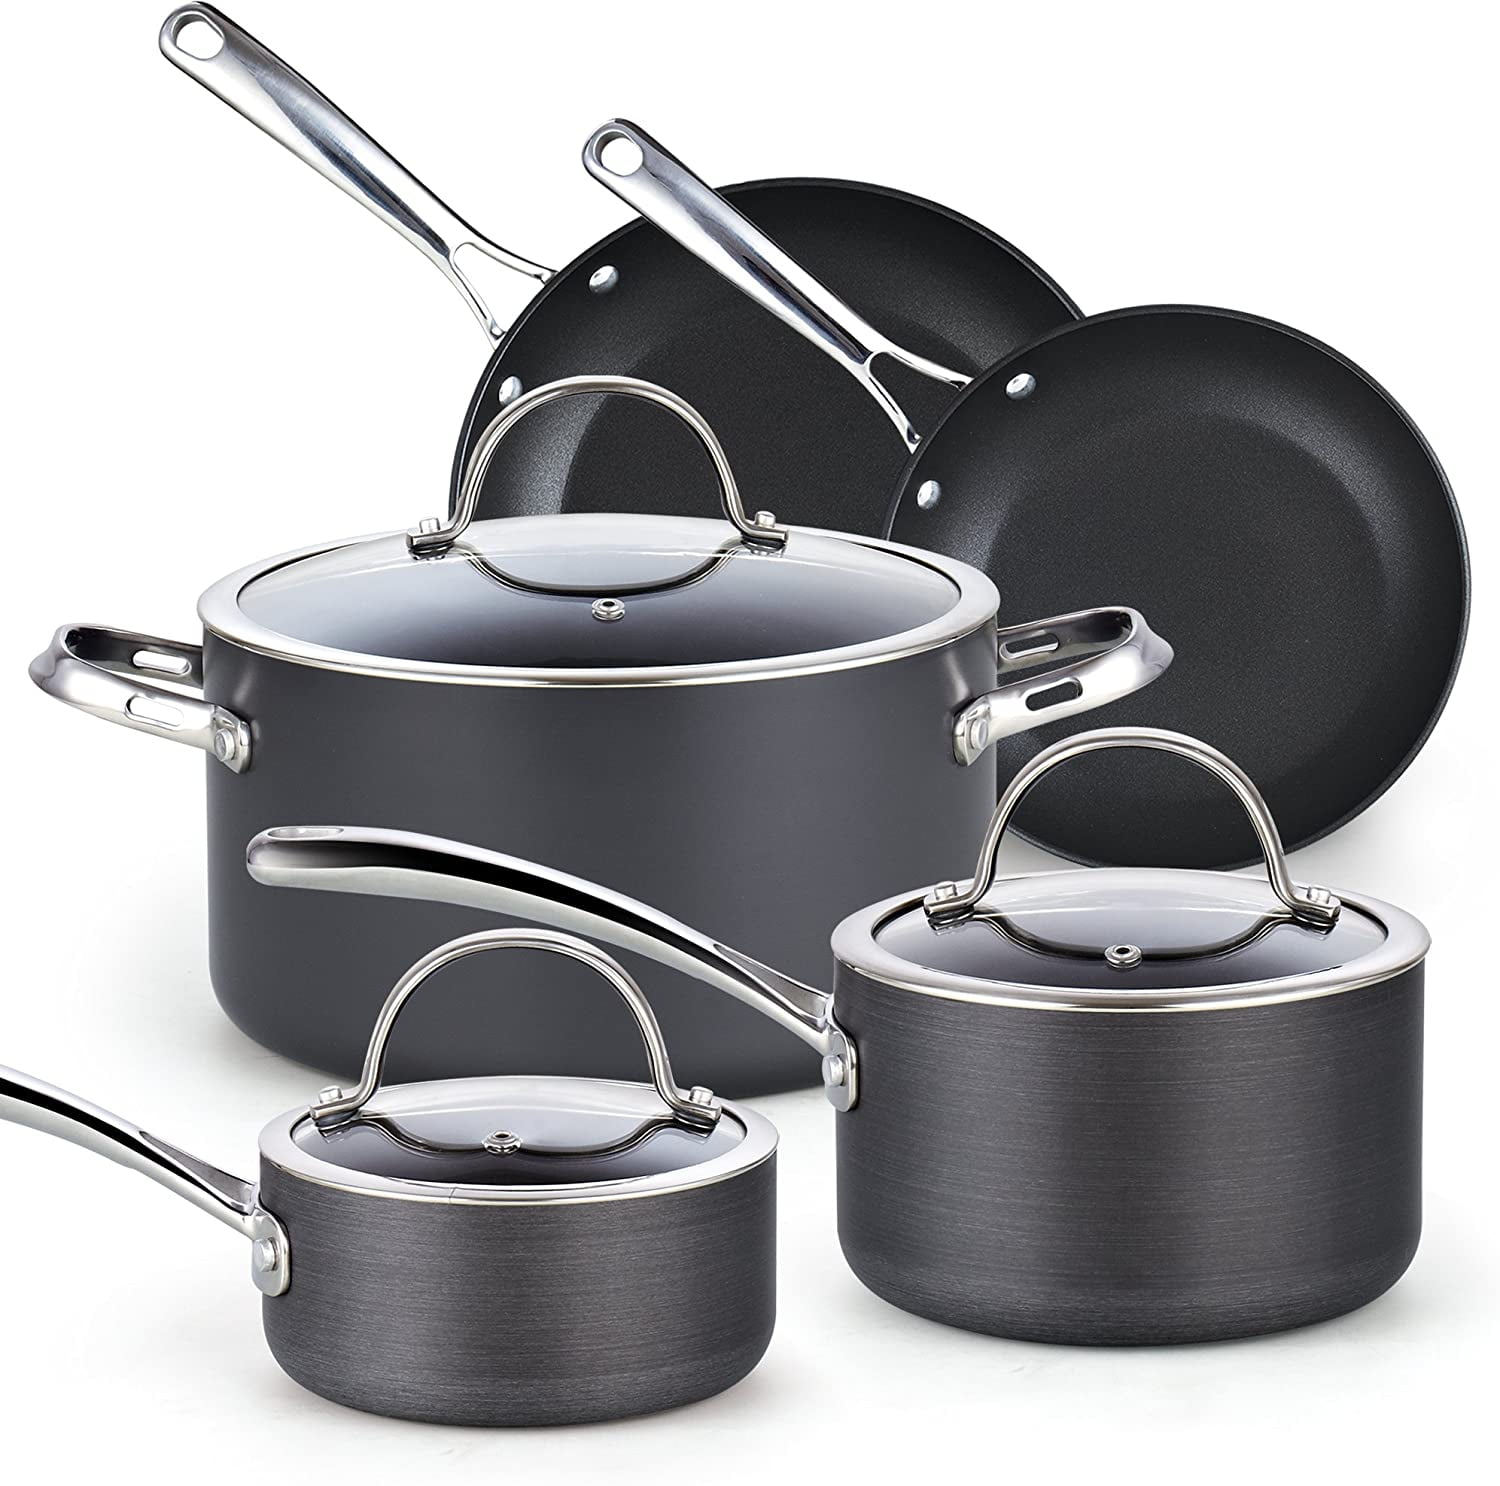 Cooks Standard Nonstick Hard Anodized Cookware Set 8 Piece Black for sale online 